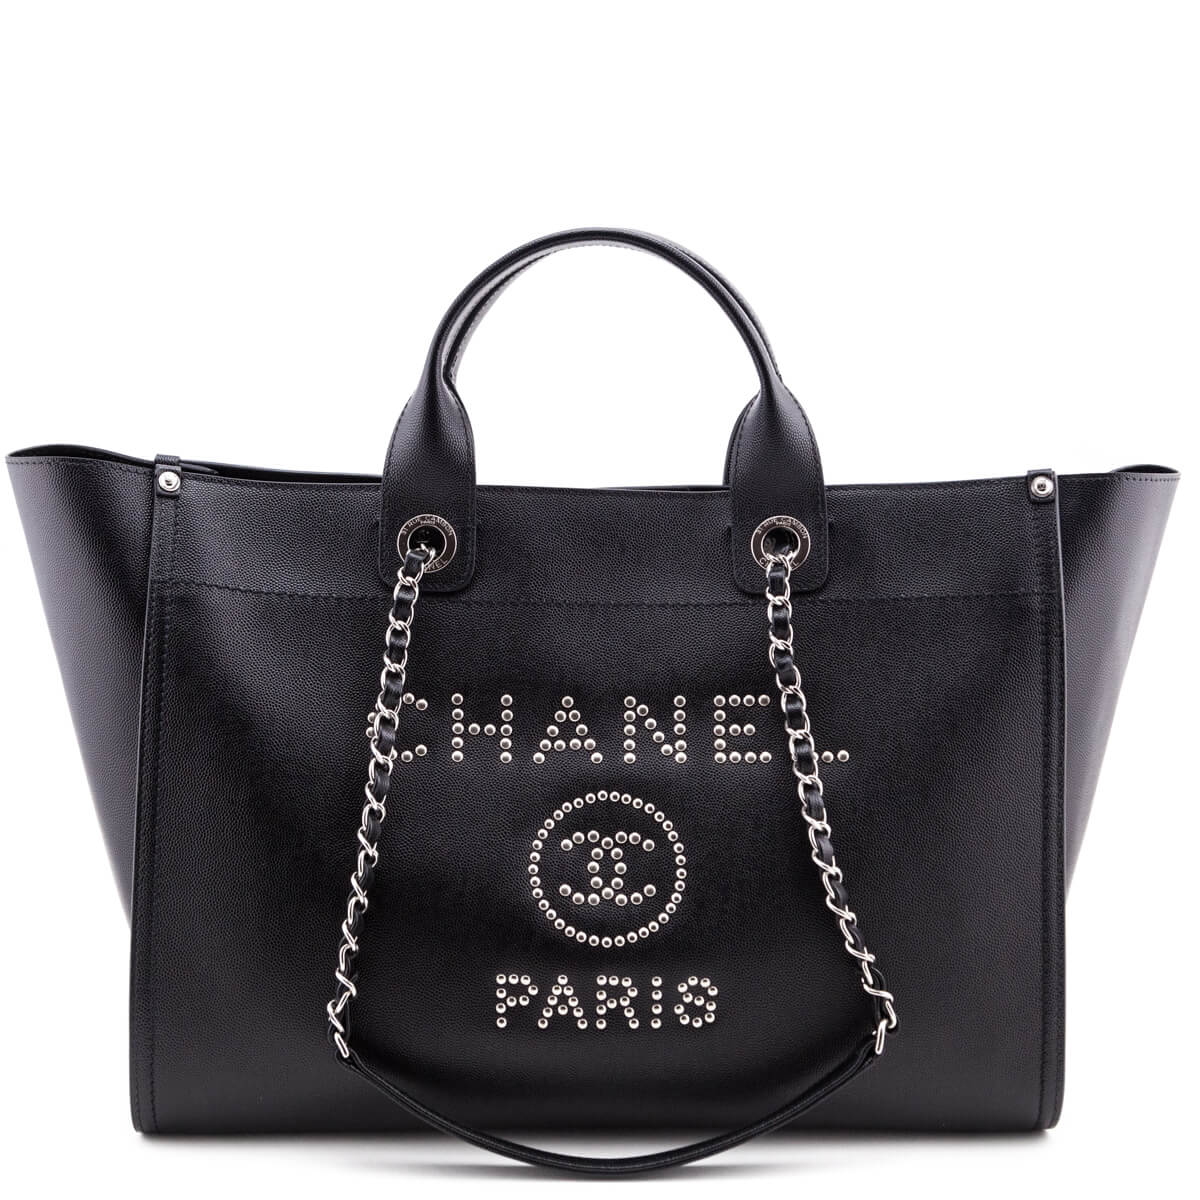 Chanel Black Grained Calfskin Large Deauville Tote SHW – Love that